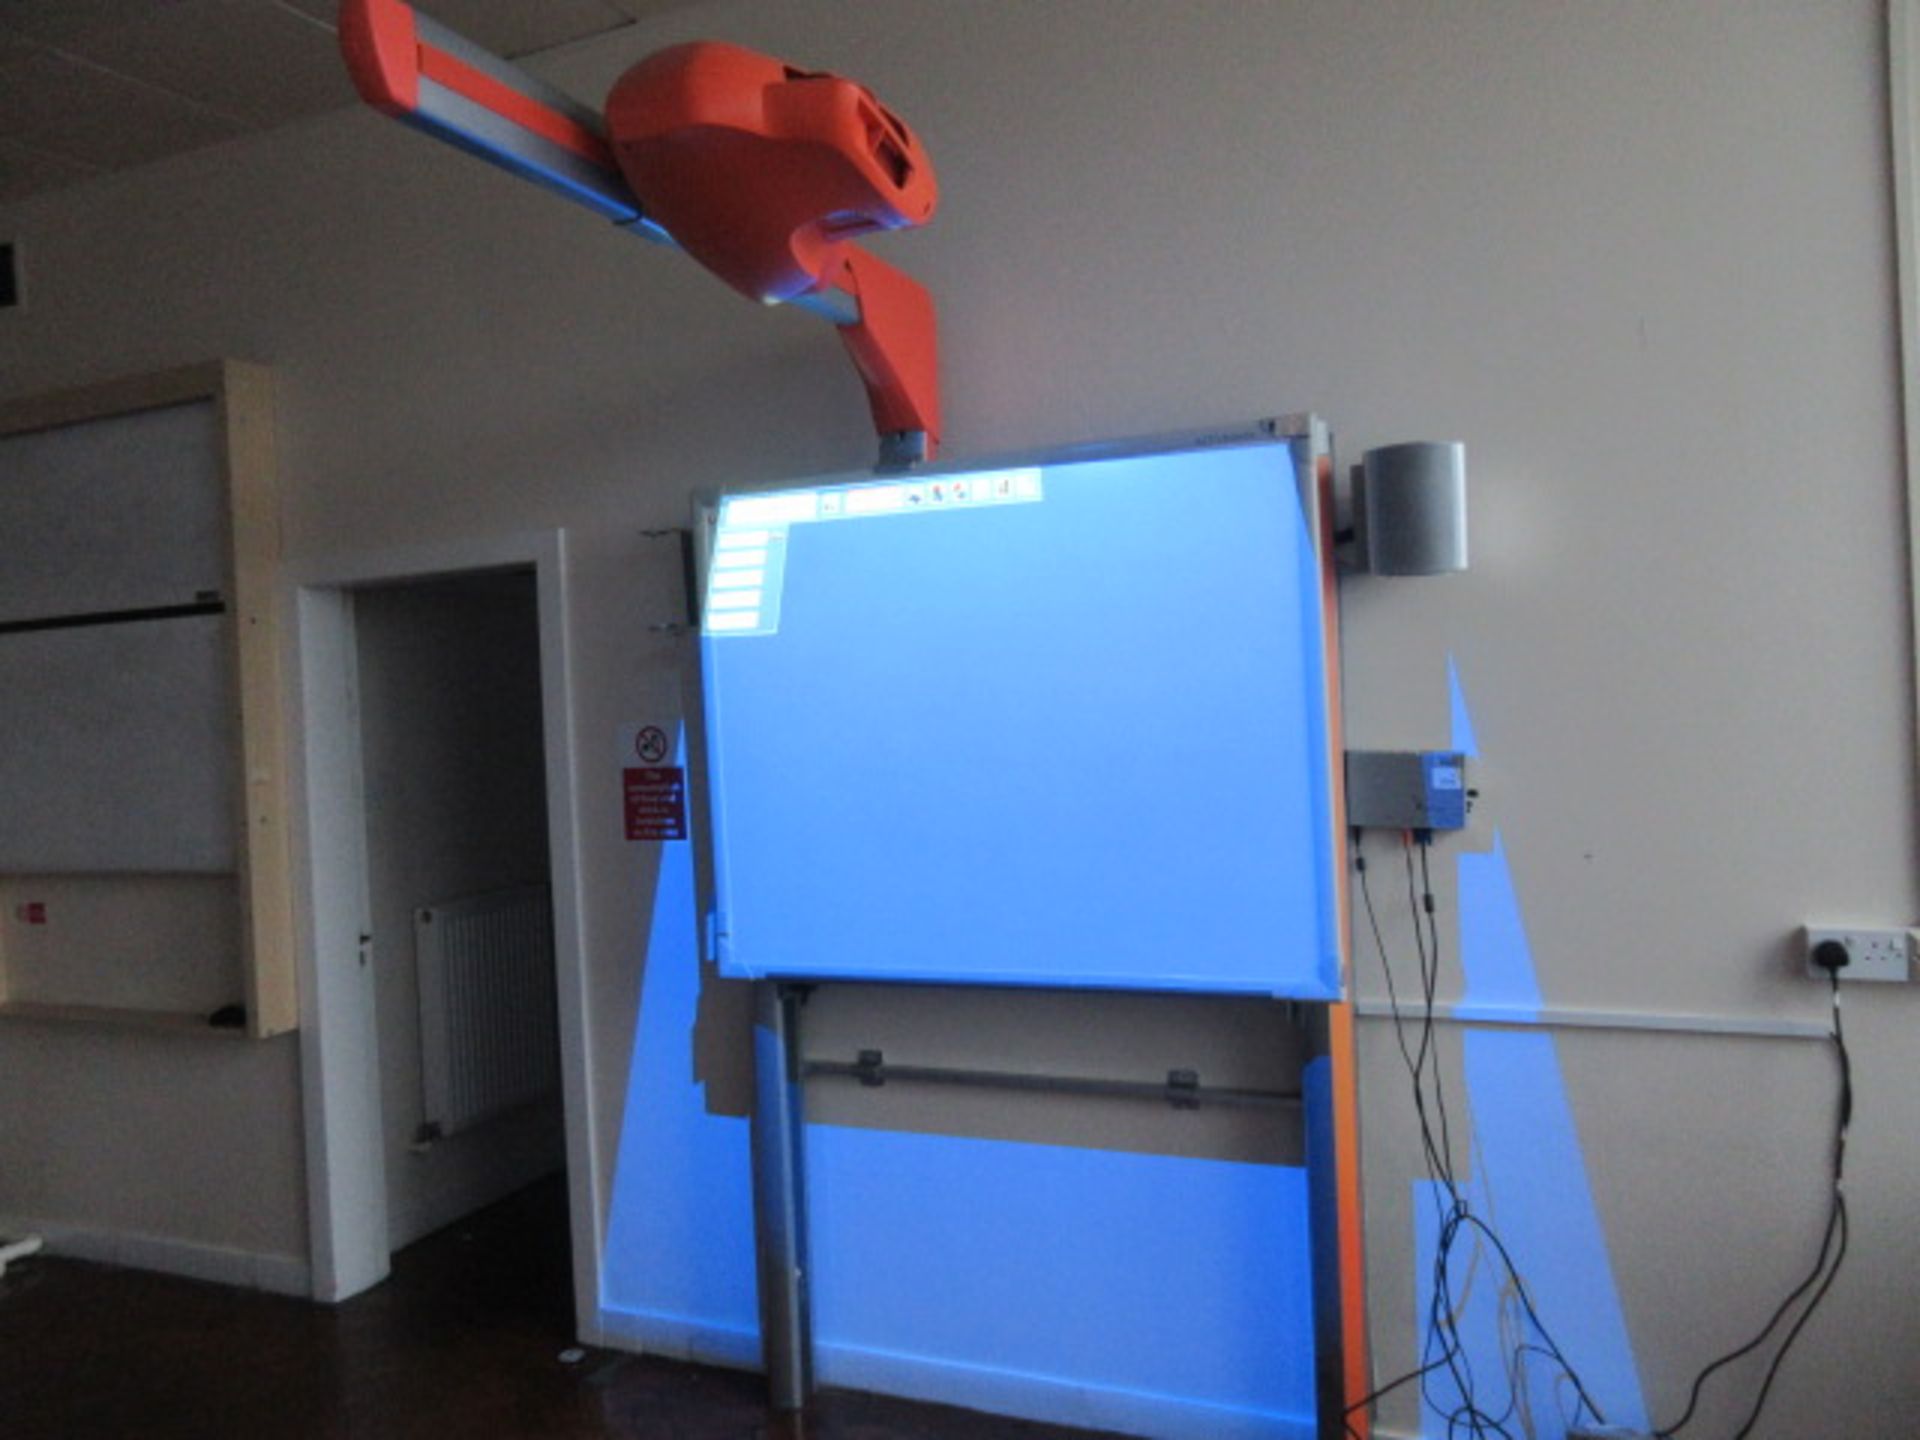 Promethean Activboard Smart Screen with overhead projector, PC & sound modules, wall mounted - Image 4 of 4